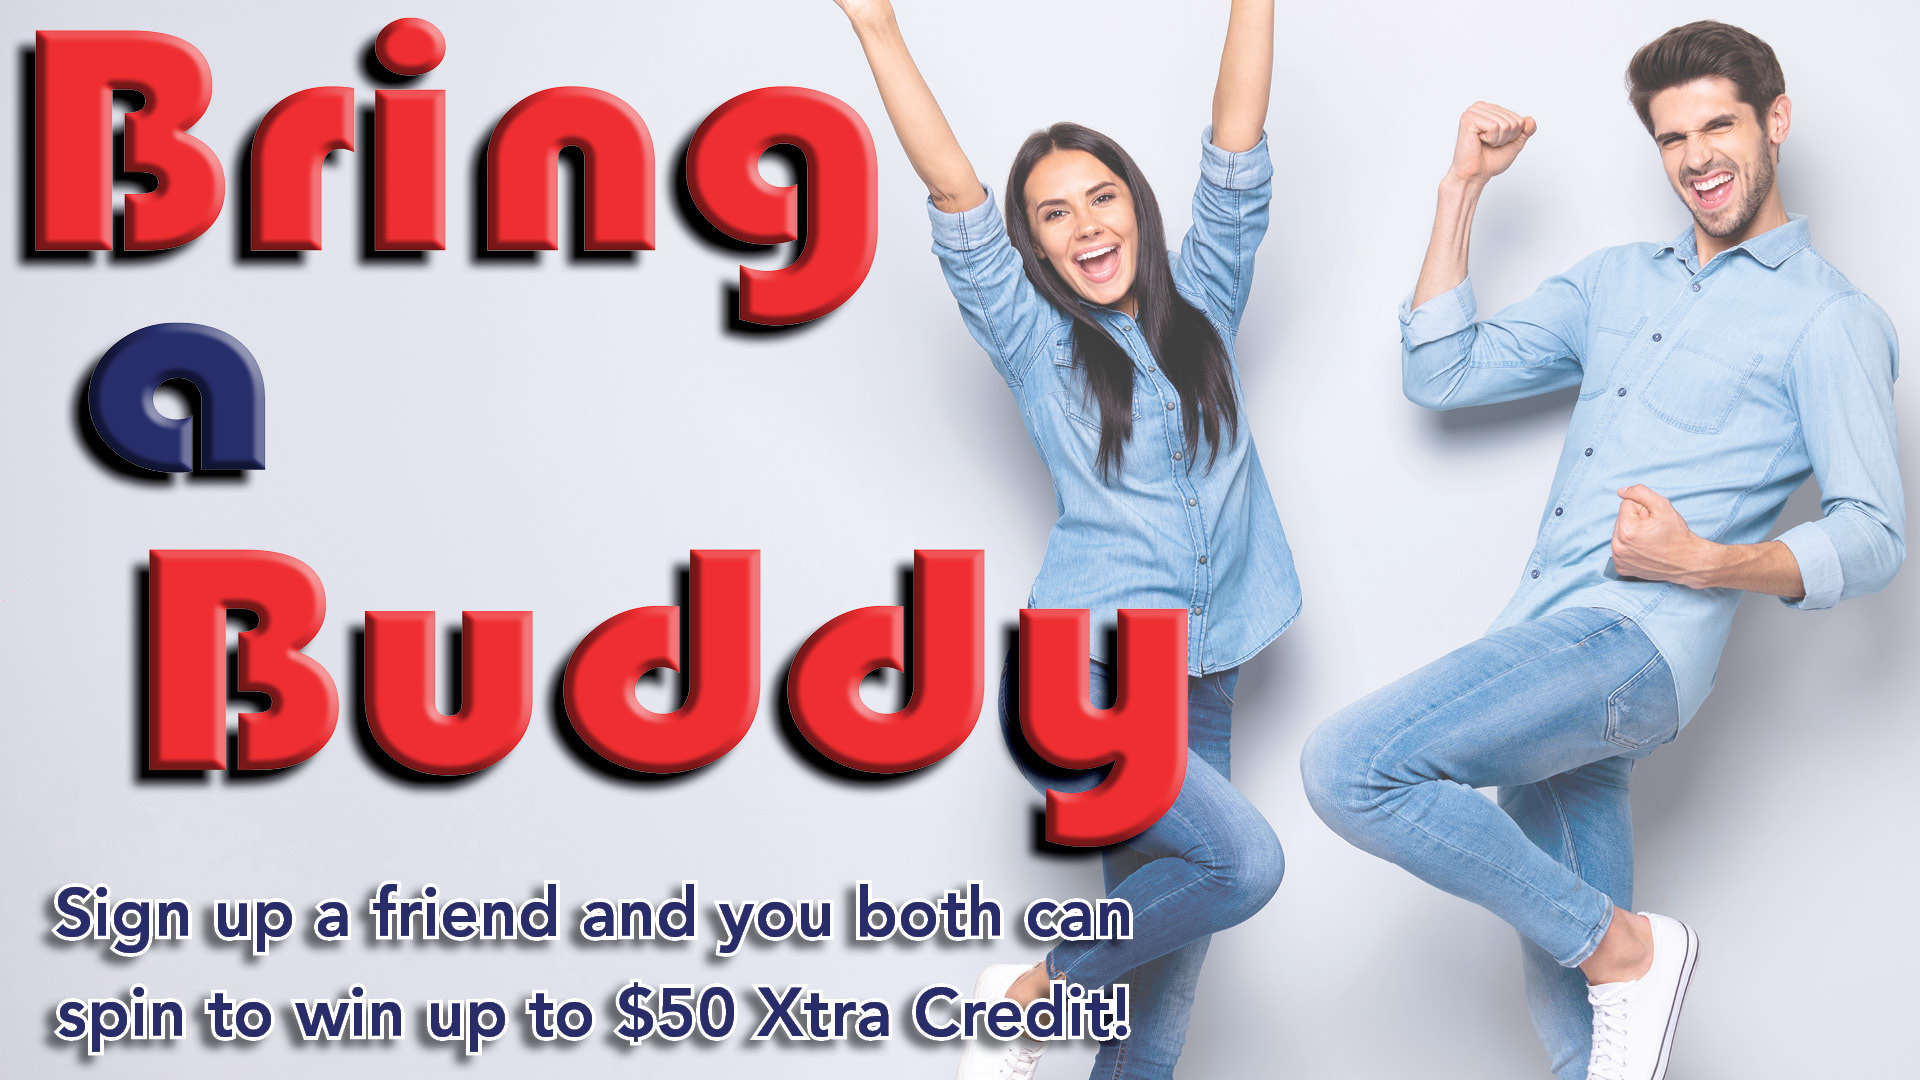 Bring a Buddy, Kwataqnuk promotions, xtra credit, sign up, spin to win